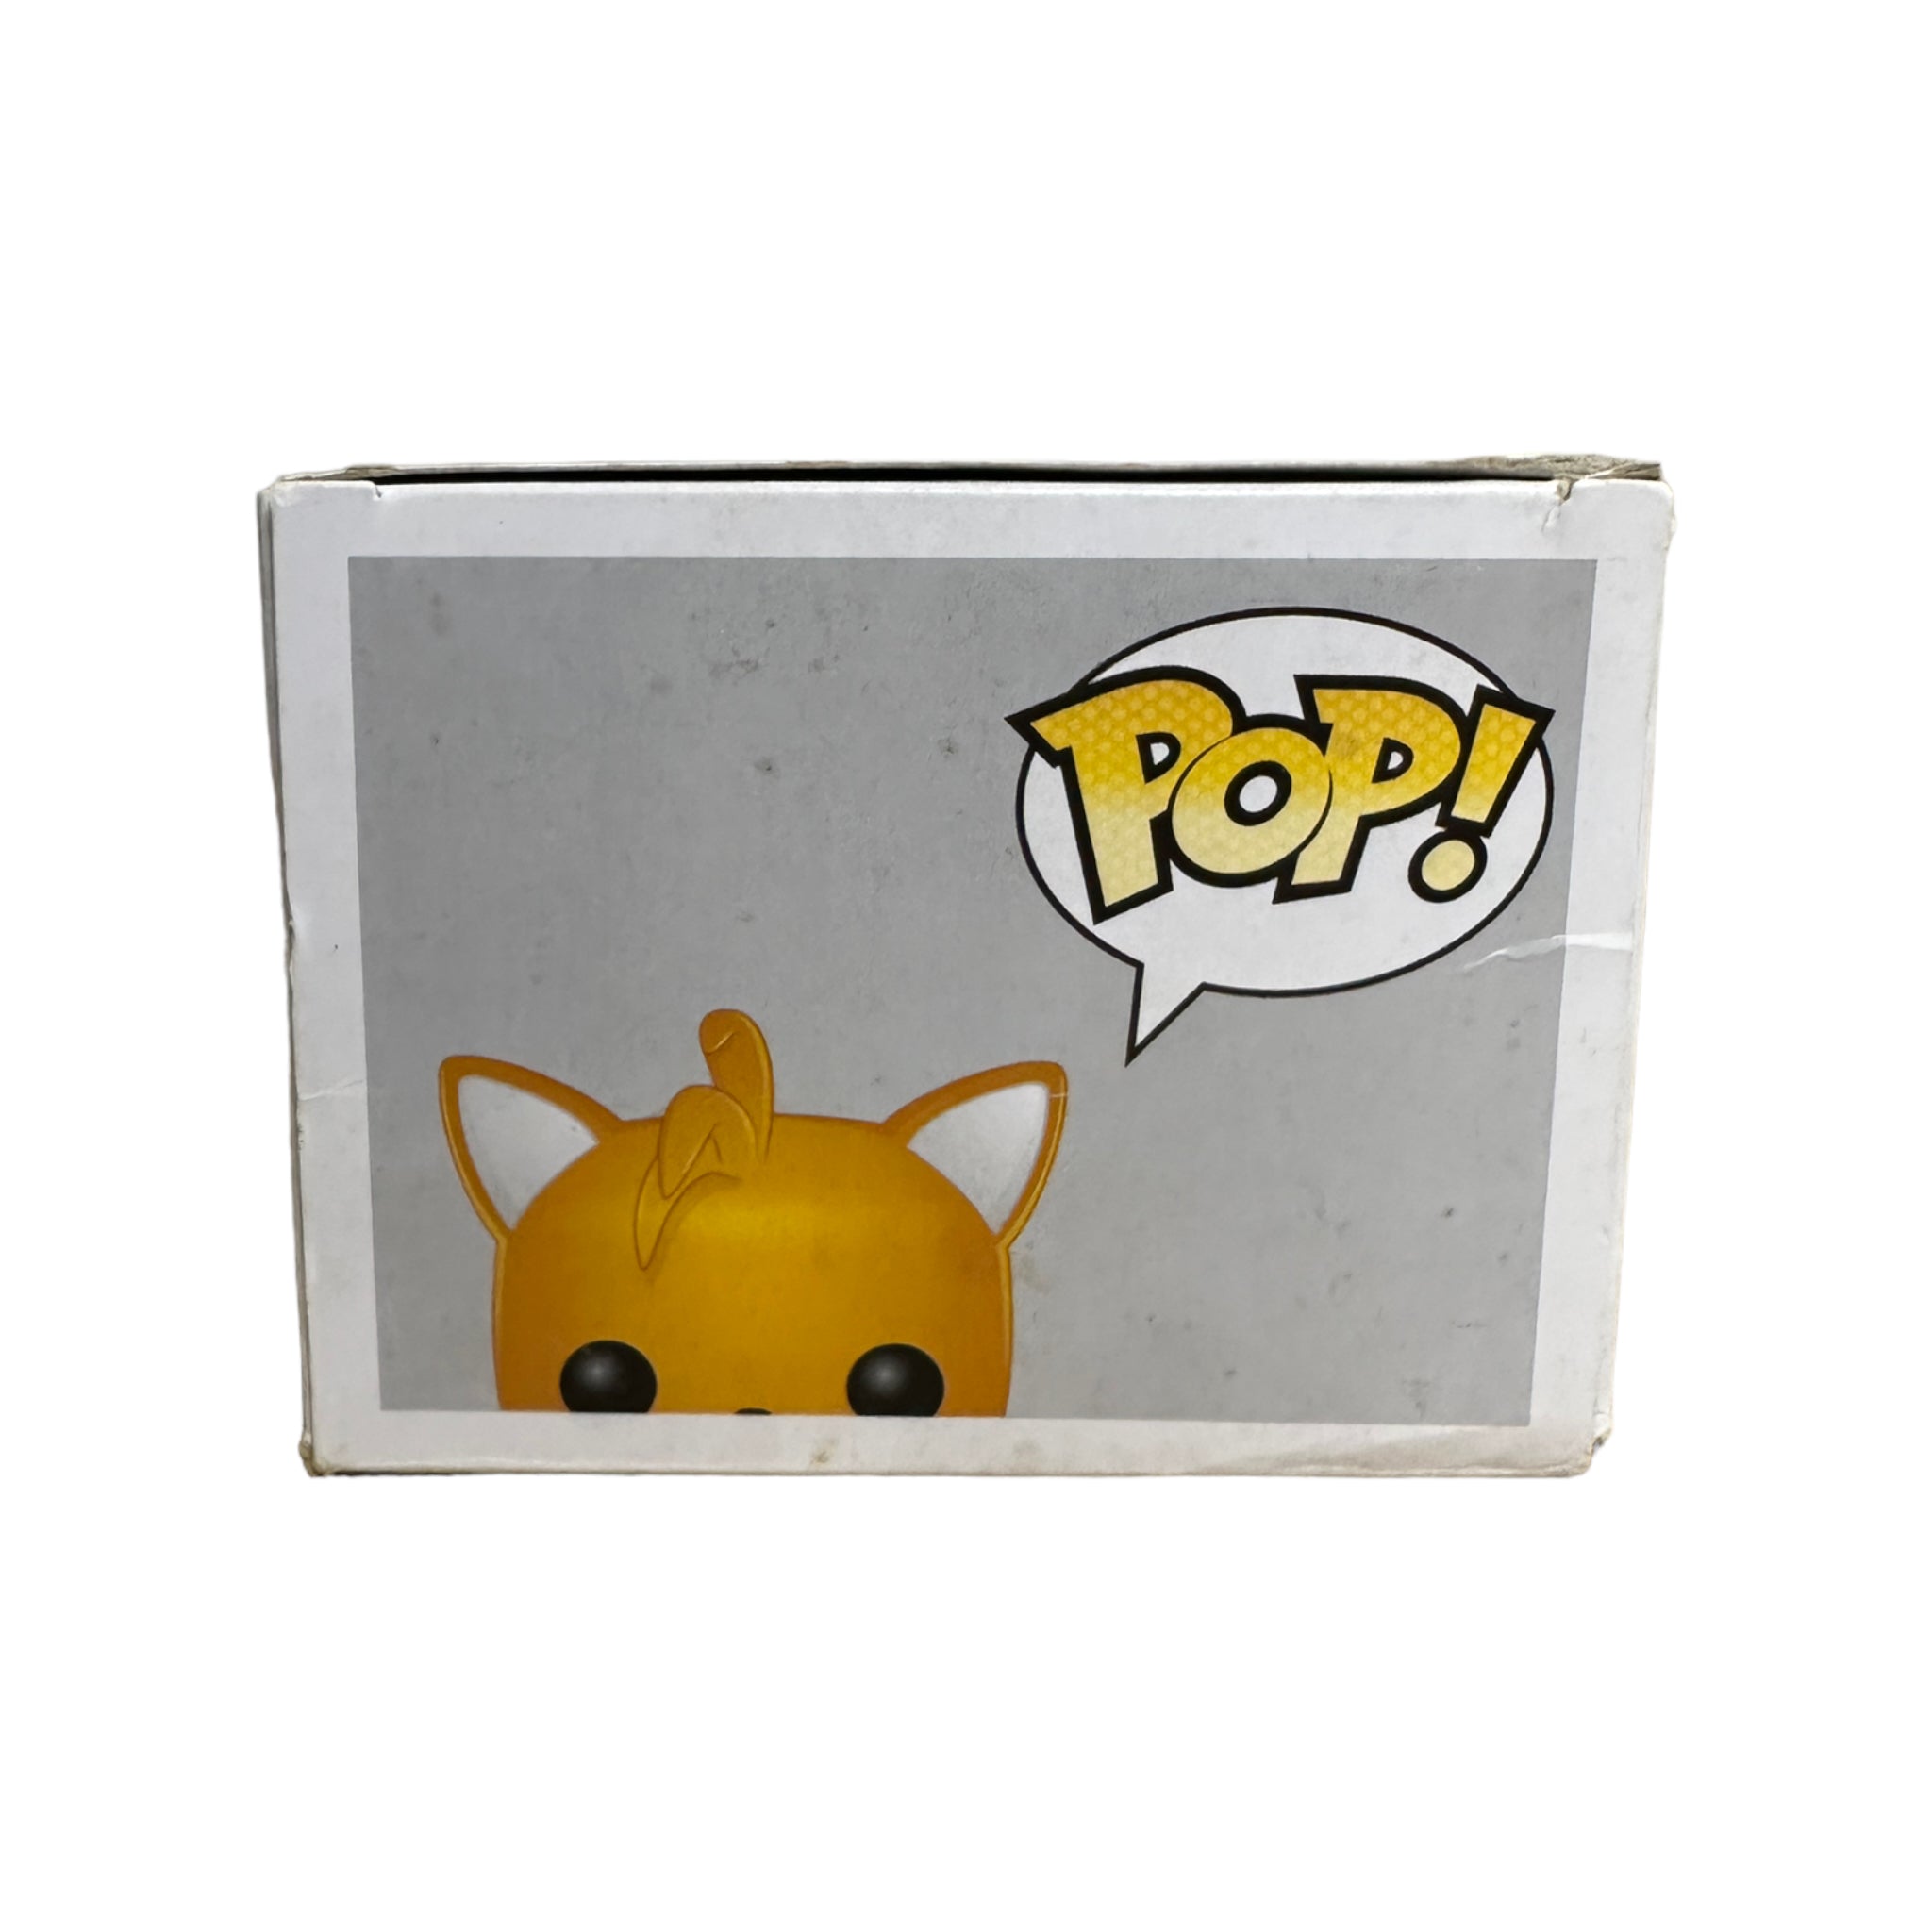 Tails #07 Funko Pop! - Sonic The Hedgehog - 2013 Pop! - Condition 6/10